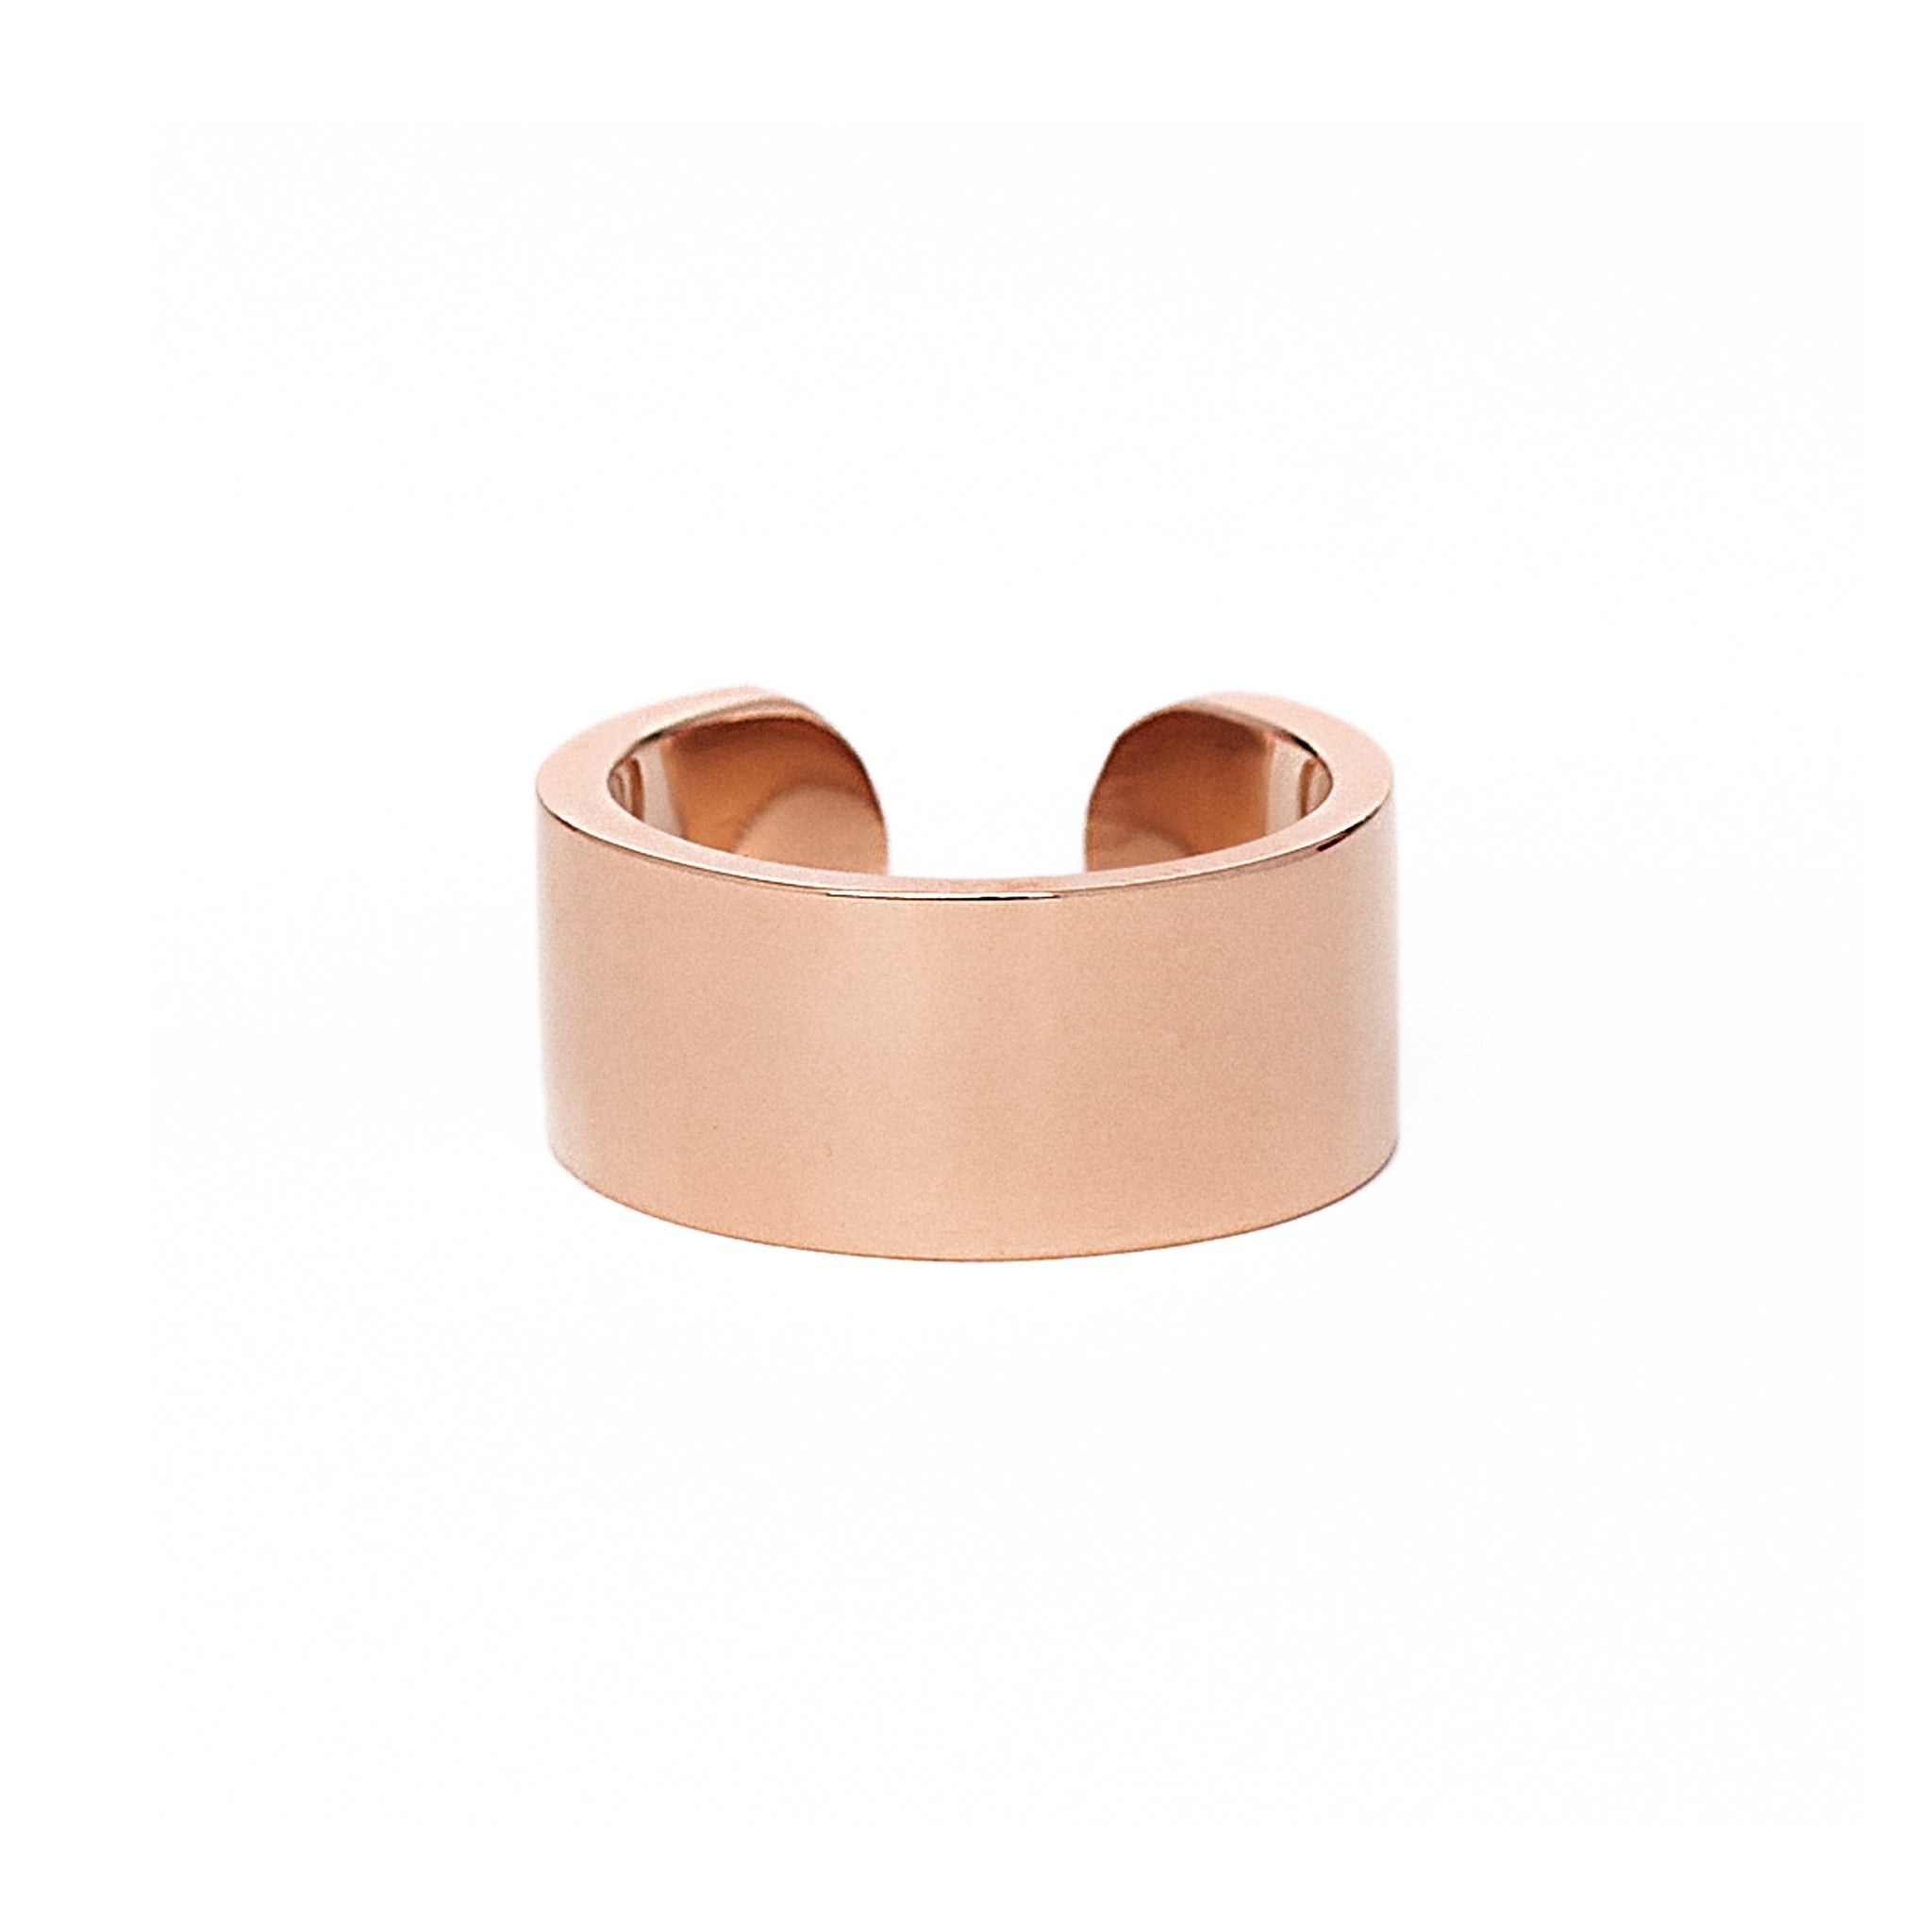 The Cunt Ring: Solid 14K Rose Gold